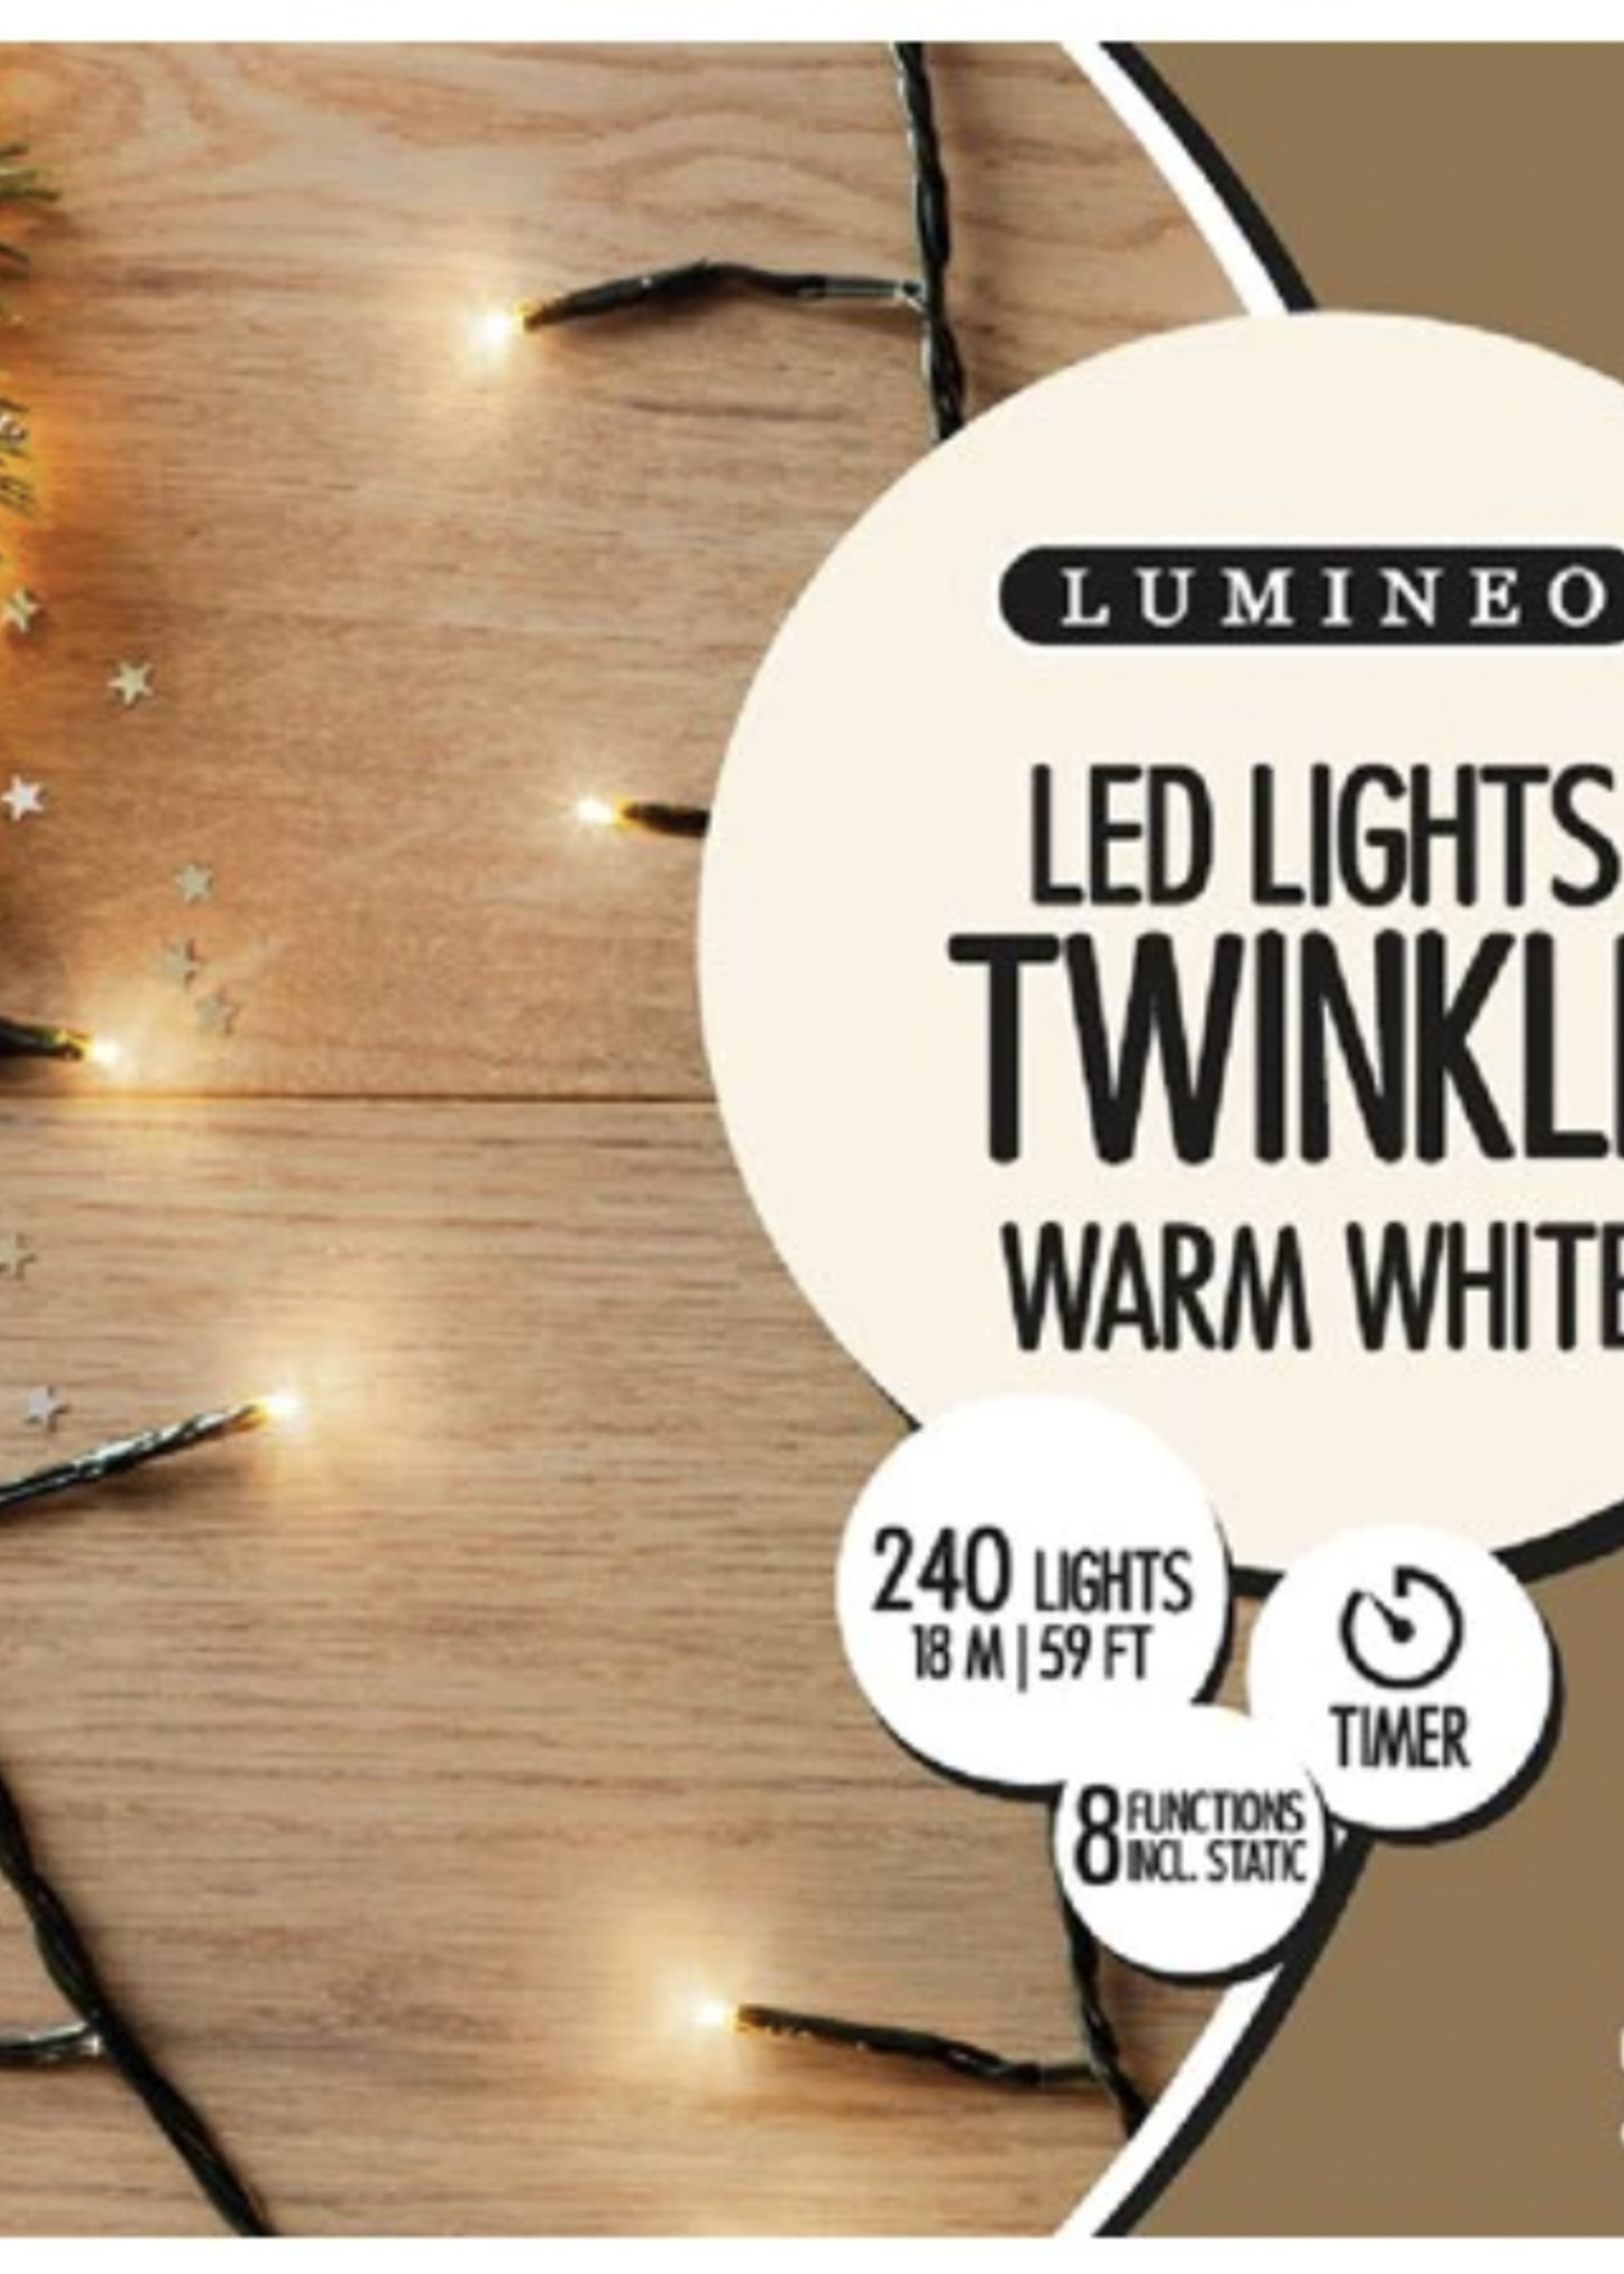 Lumineo Warm White 240 LED Twinkle Lights Indoor/Outdoor